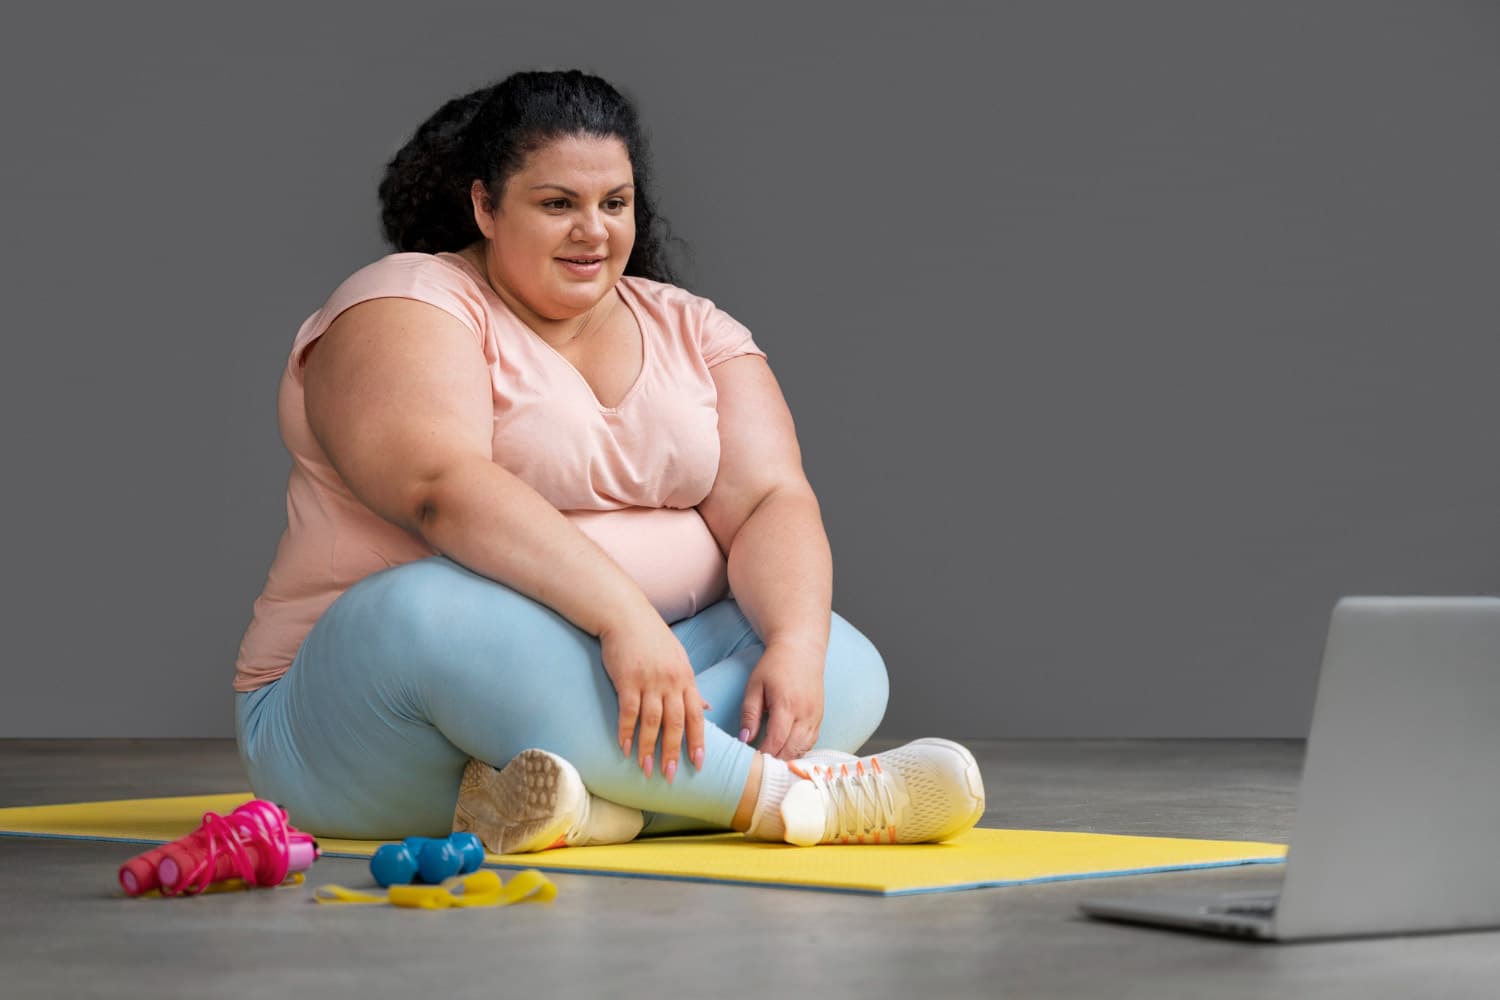 Image showing obese woman